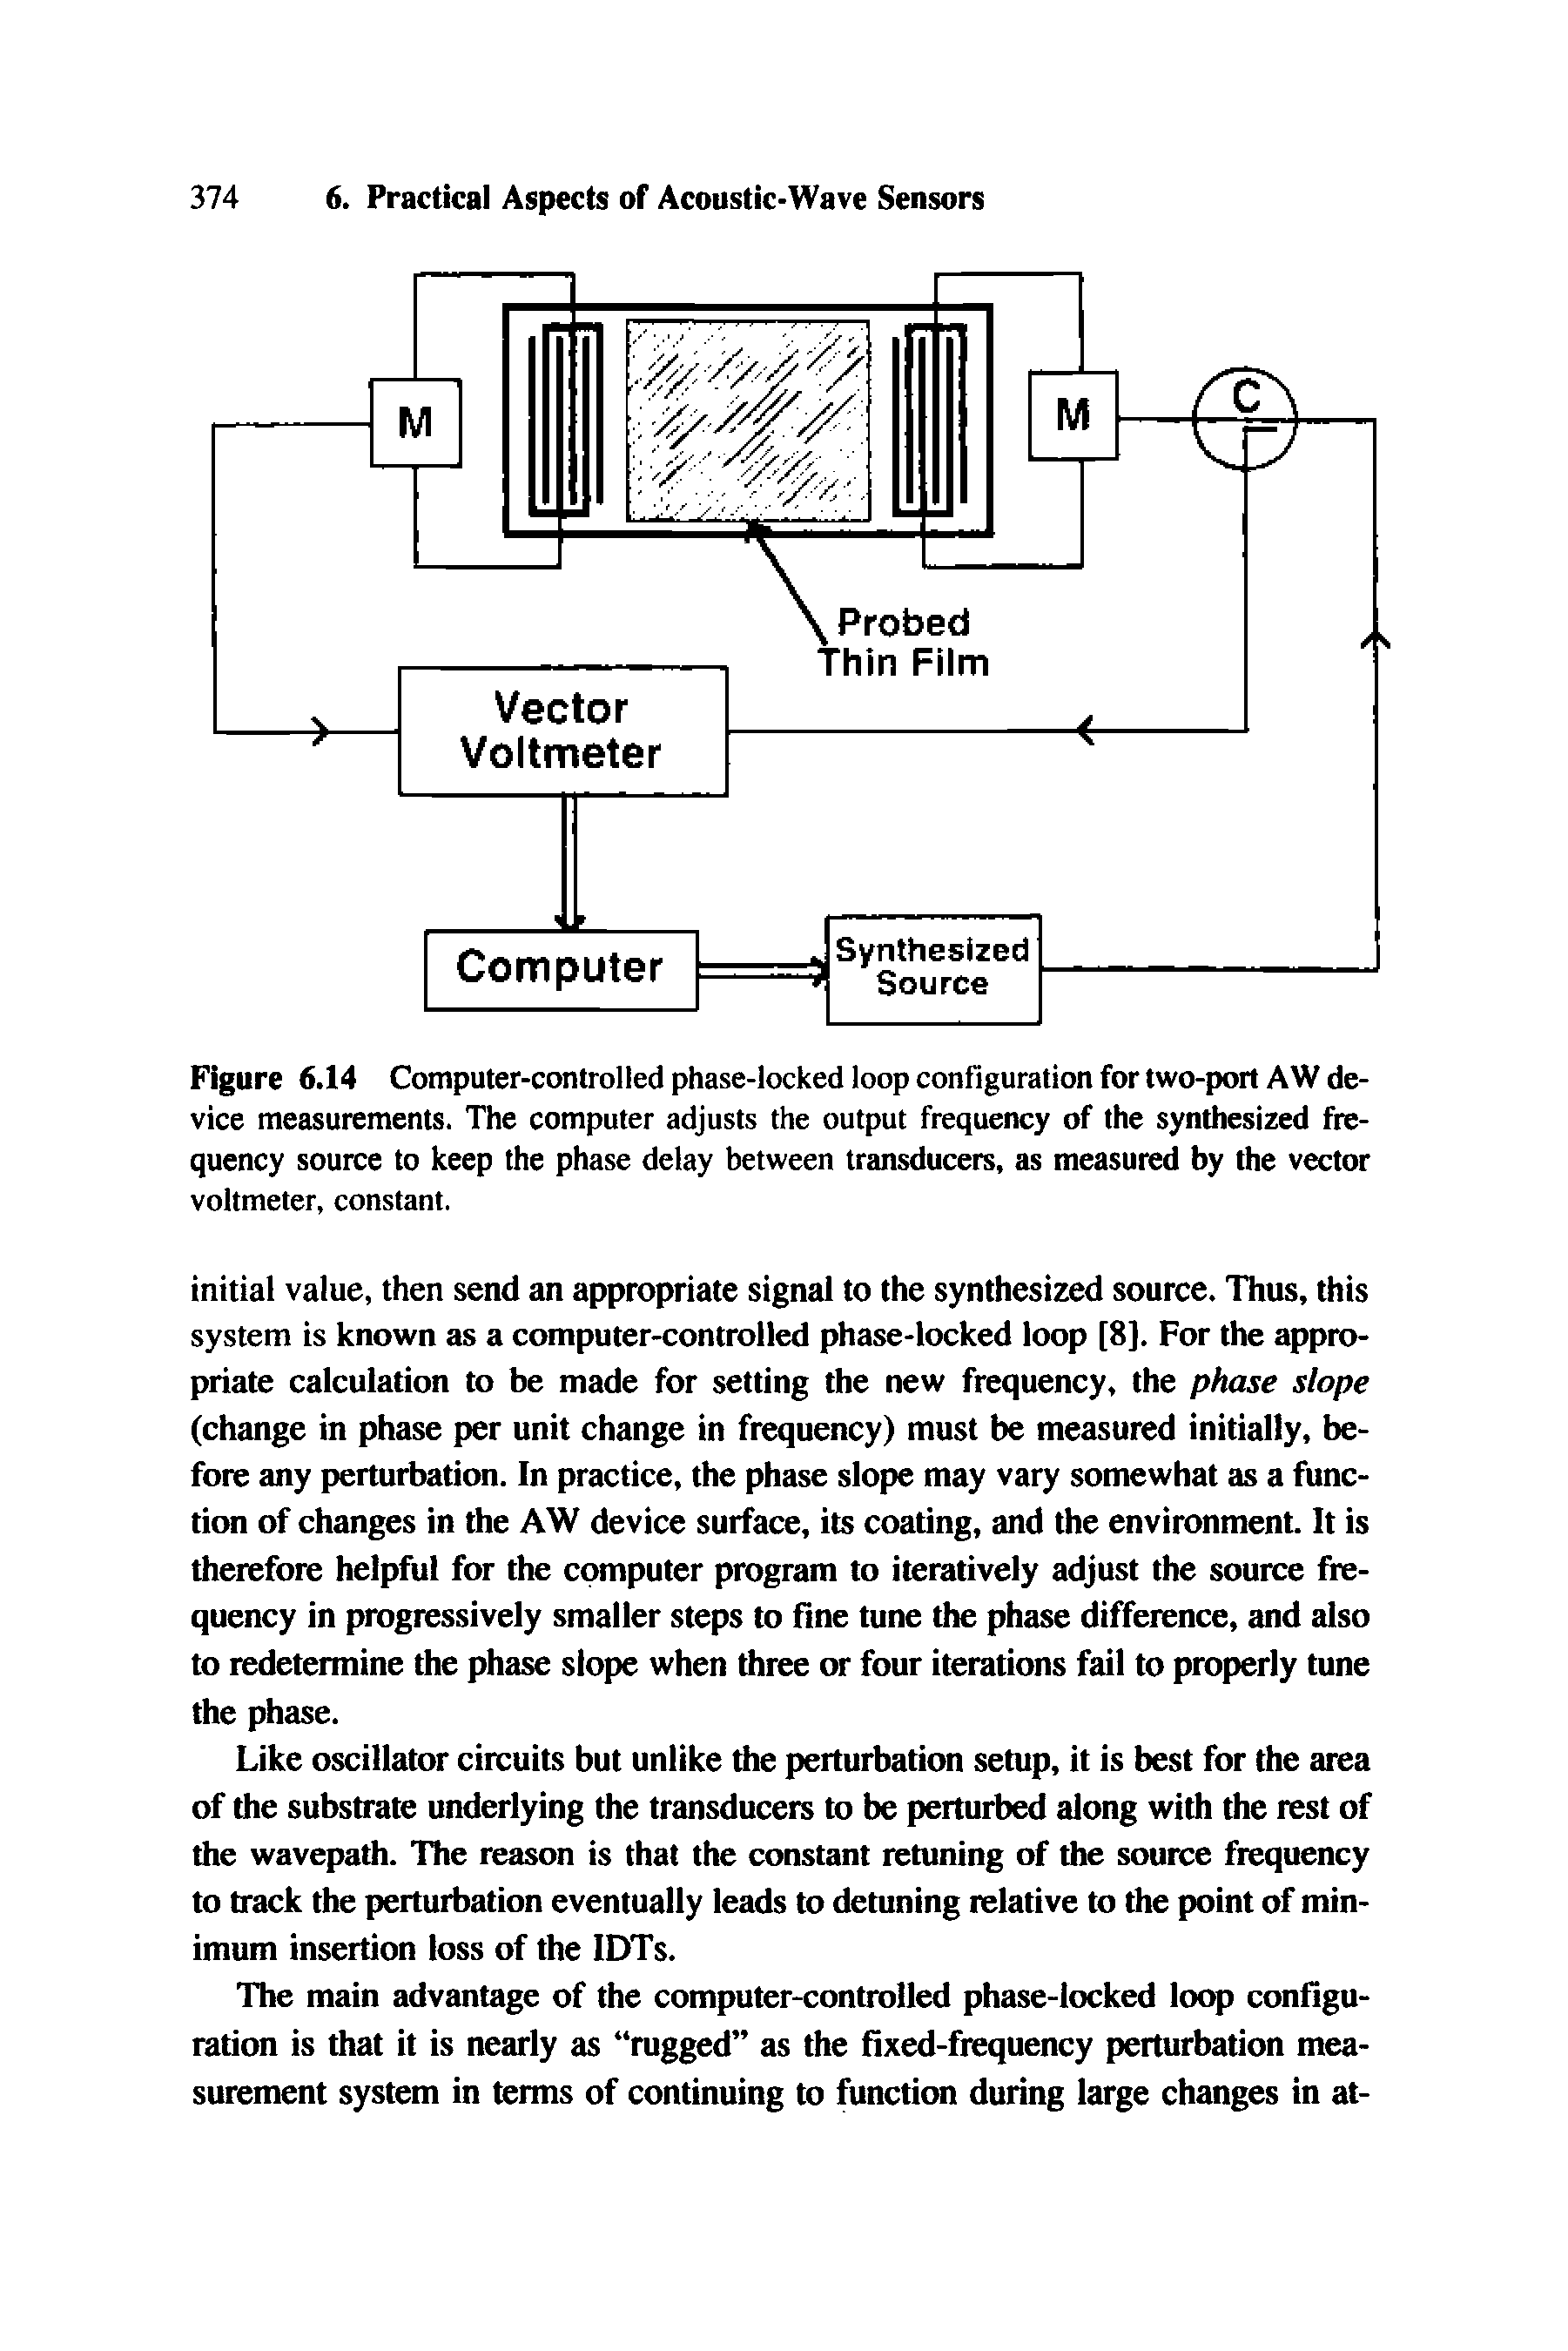 Figure 6.14 Computer-controlled phase-locked loop configuration for two-porl AW device measurements. The computer adjusts the output frequency of the synthesized frequency source to keep the phase delay between transducers, as measured by the vector...